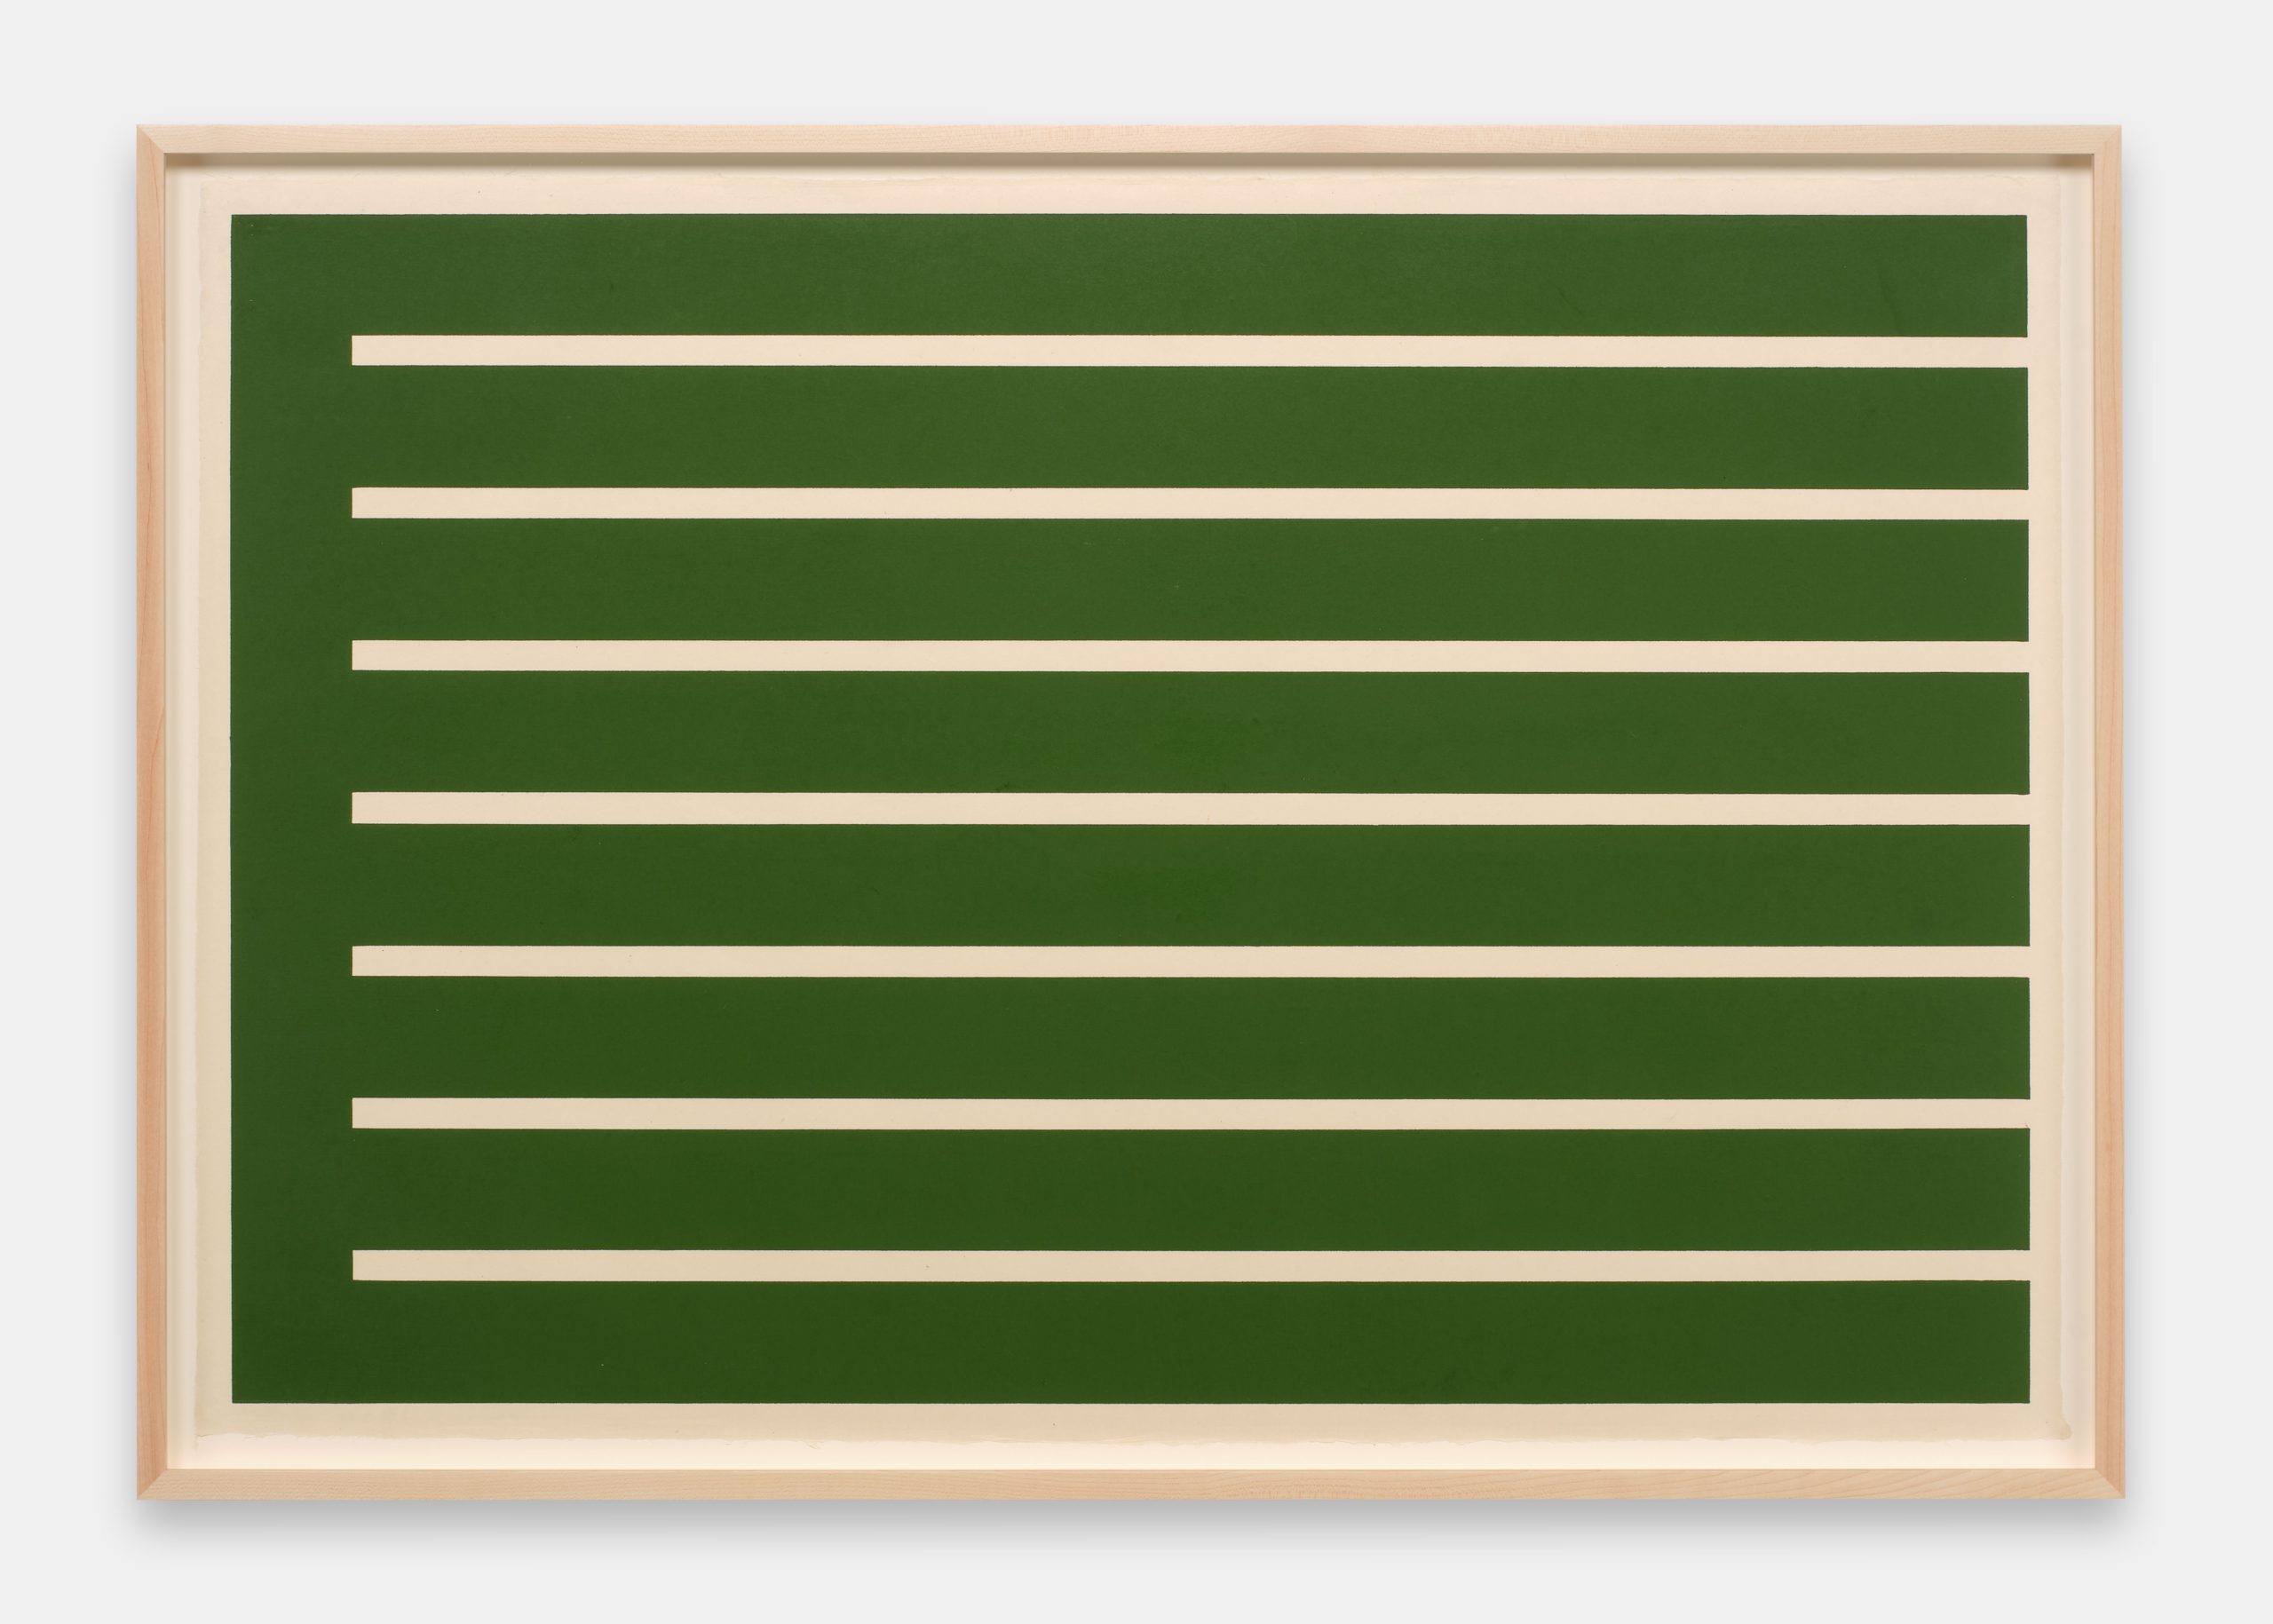 Untitled by Donald Judd